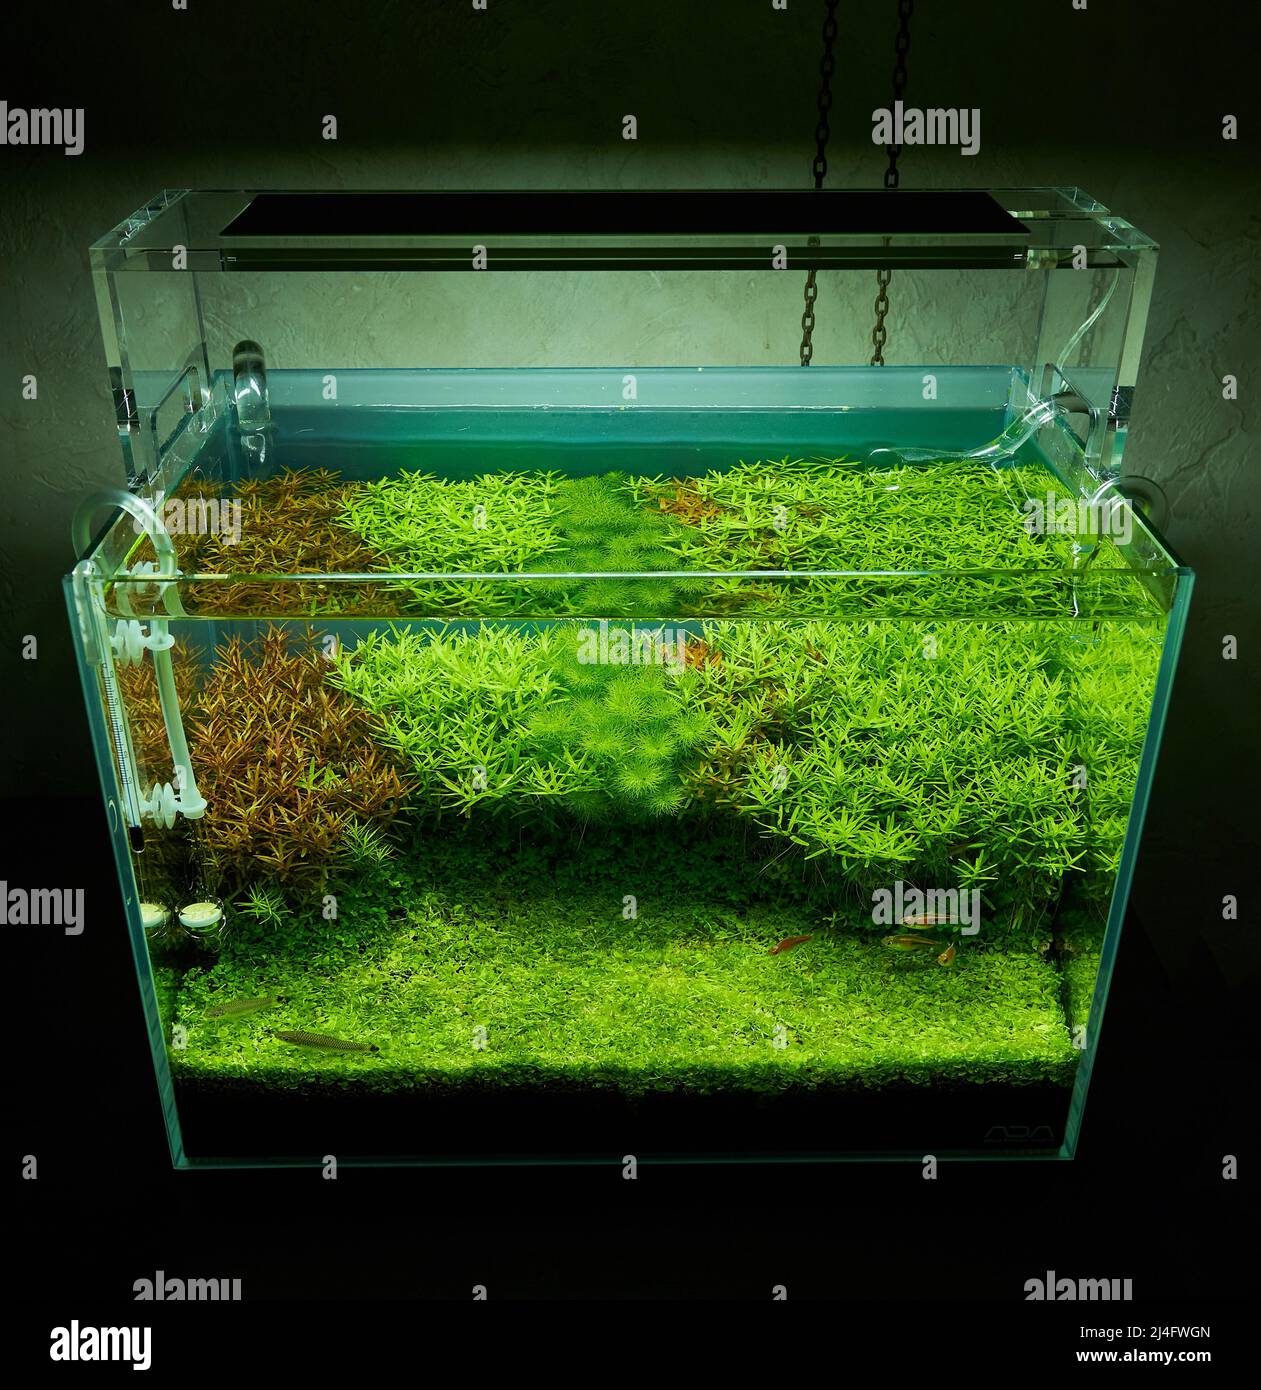 Aquascape with rotalas and montecarlo plant carpet in the dark room. CO2 glass diffuser and lily pipes inside. Led lighting above. Stock Photo